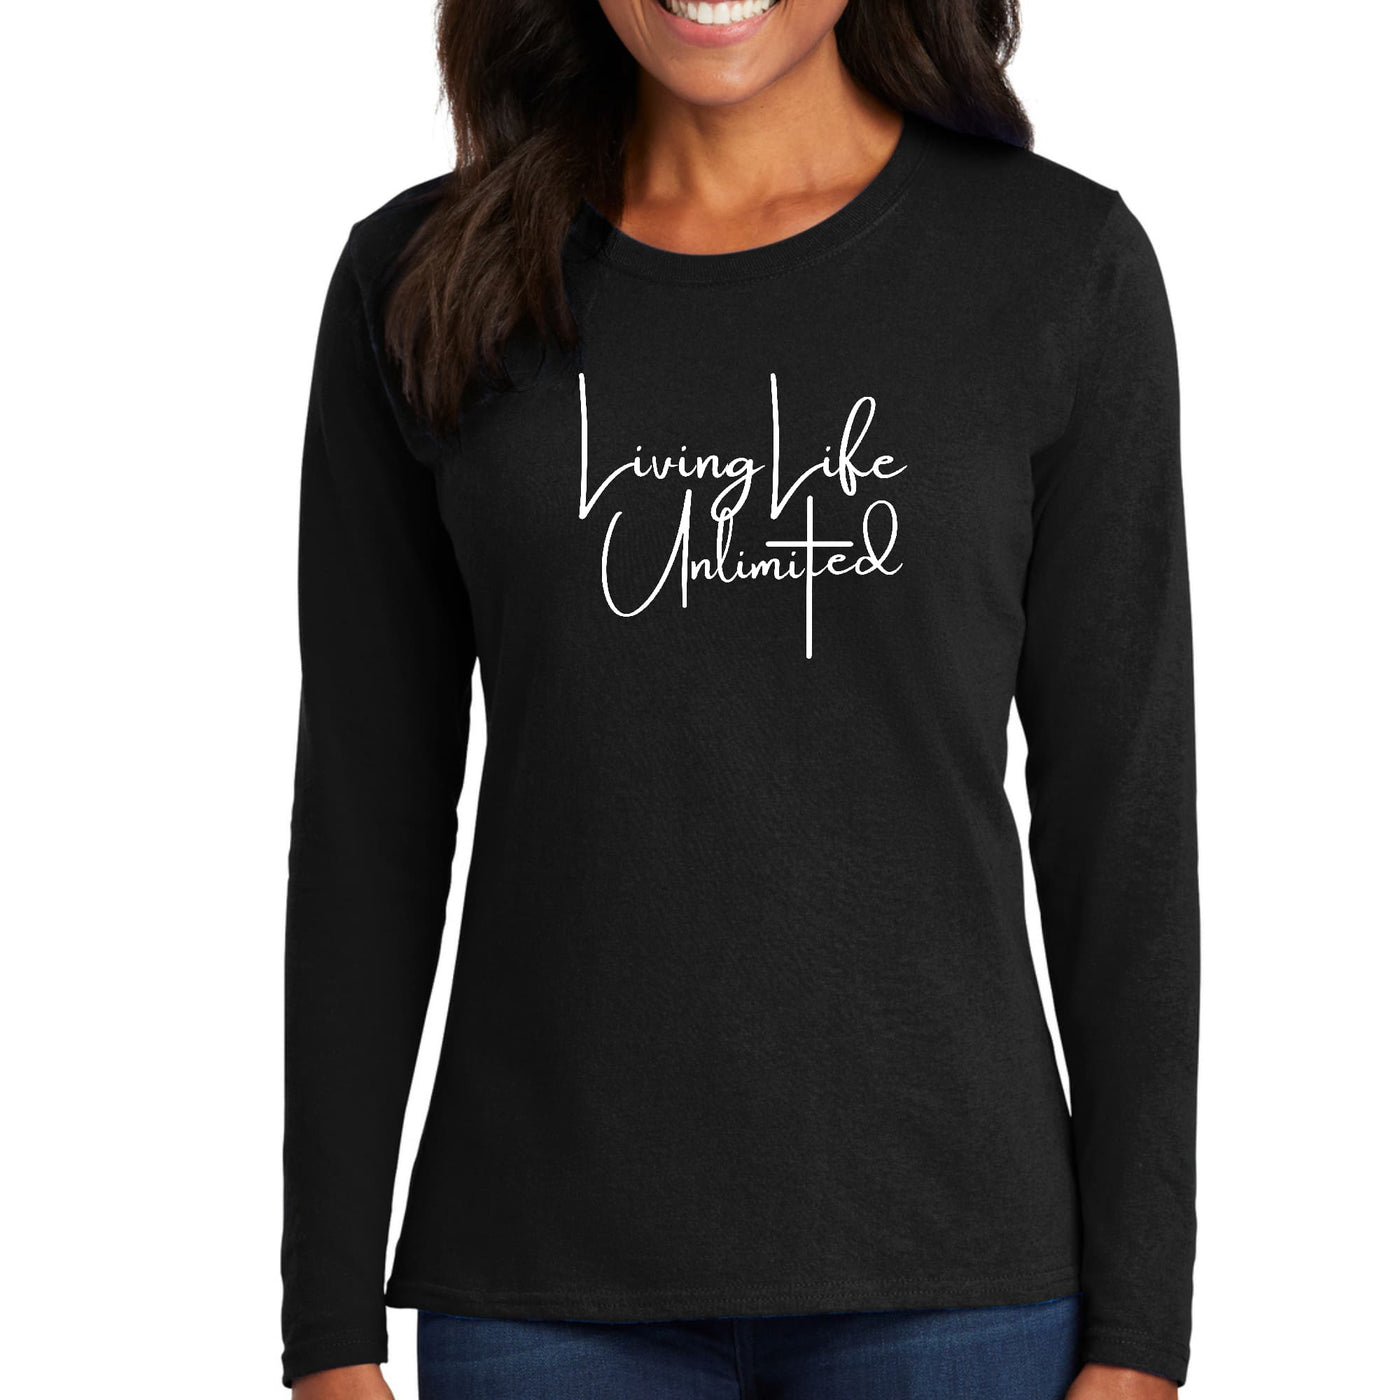 Womens Long Sleeve Graphic T-shirt Living Life Unlimited - Womens | T-Shirts